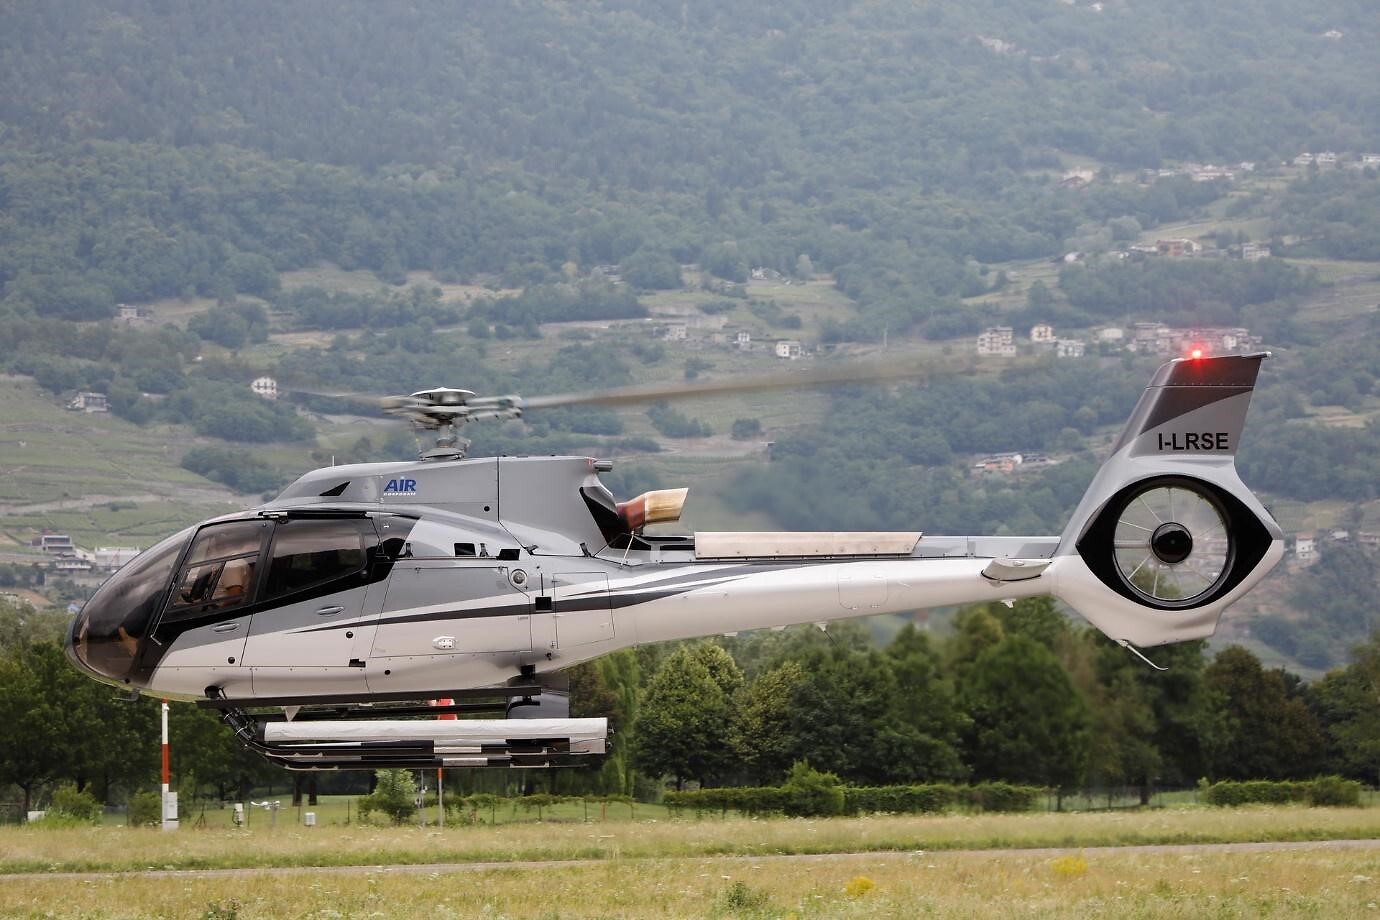 Press Release - Largest  Commercial  Helicopter  Order  Booked  by Airbus in Italy , Customer Is  Air Corporate .